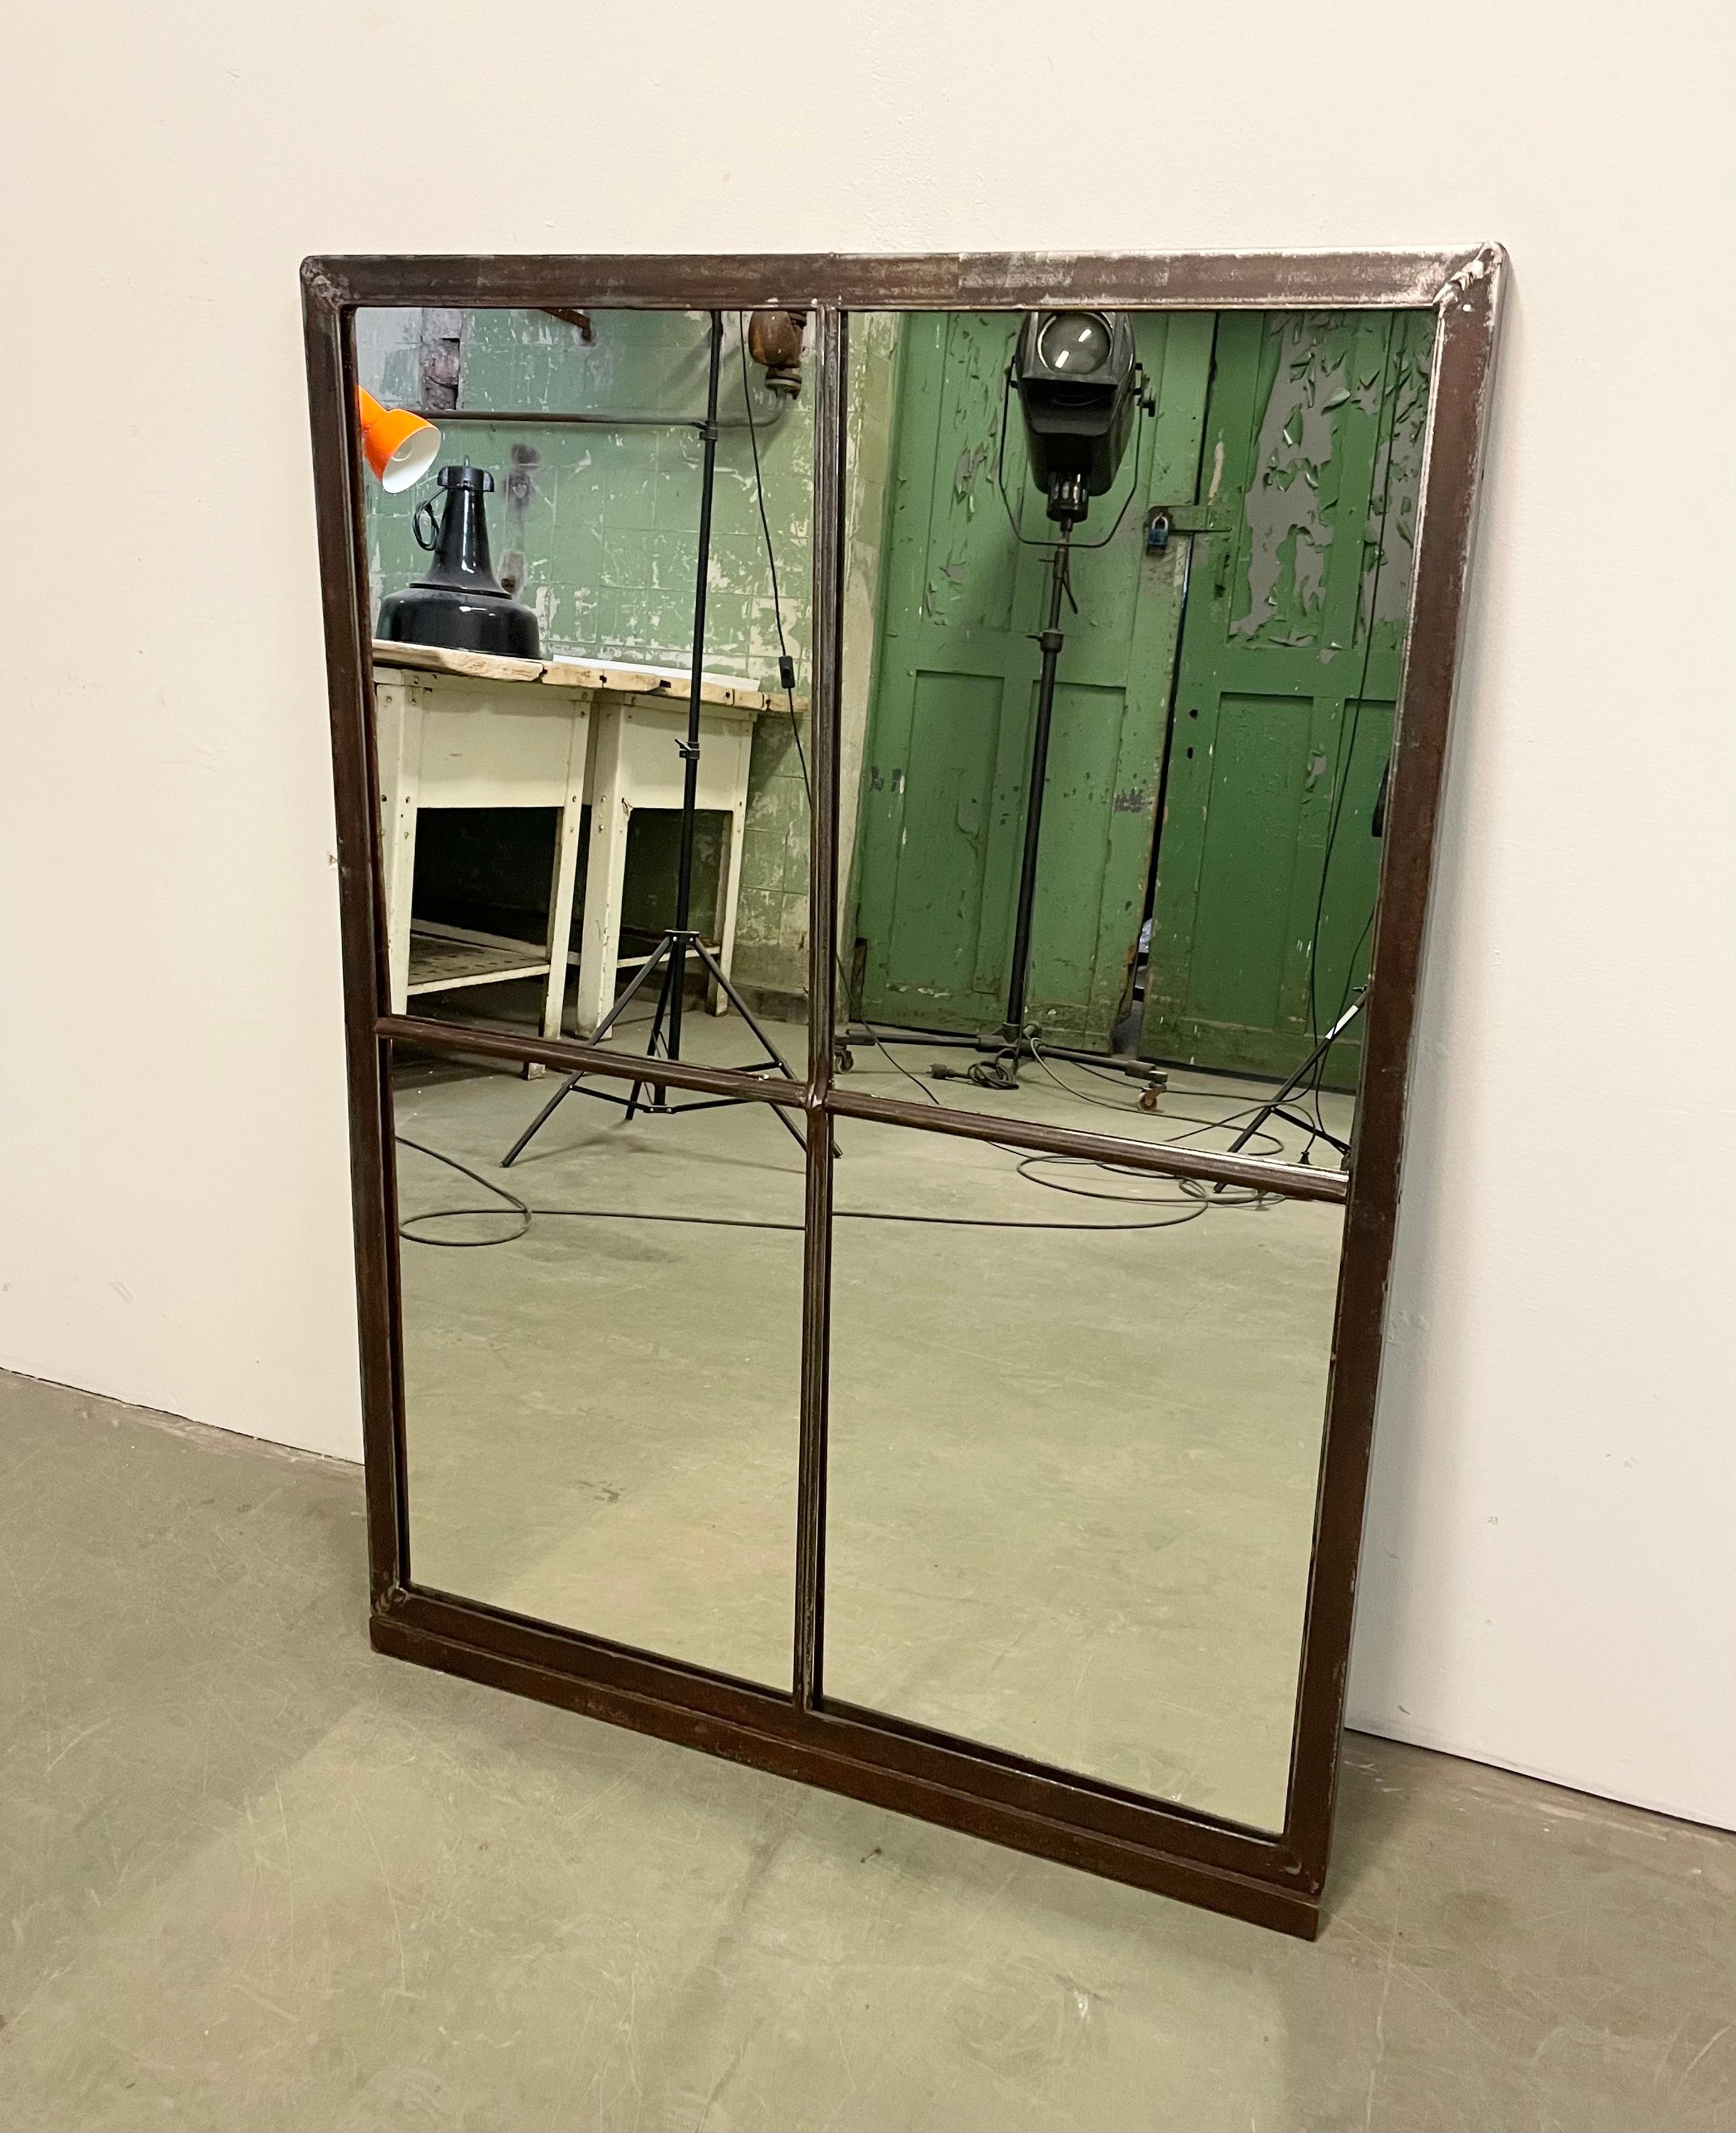 This iron industrial window frame has been transformed into a mirror. The weight of the mirror is 17 kg.